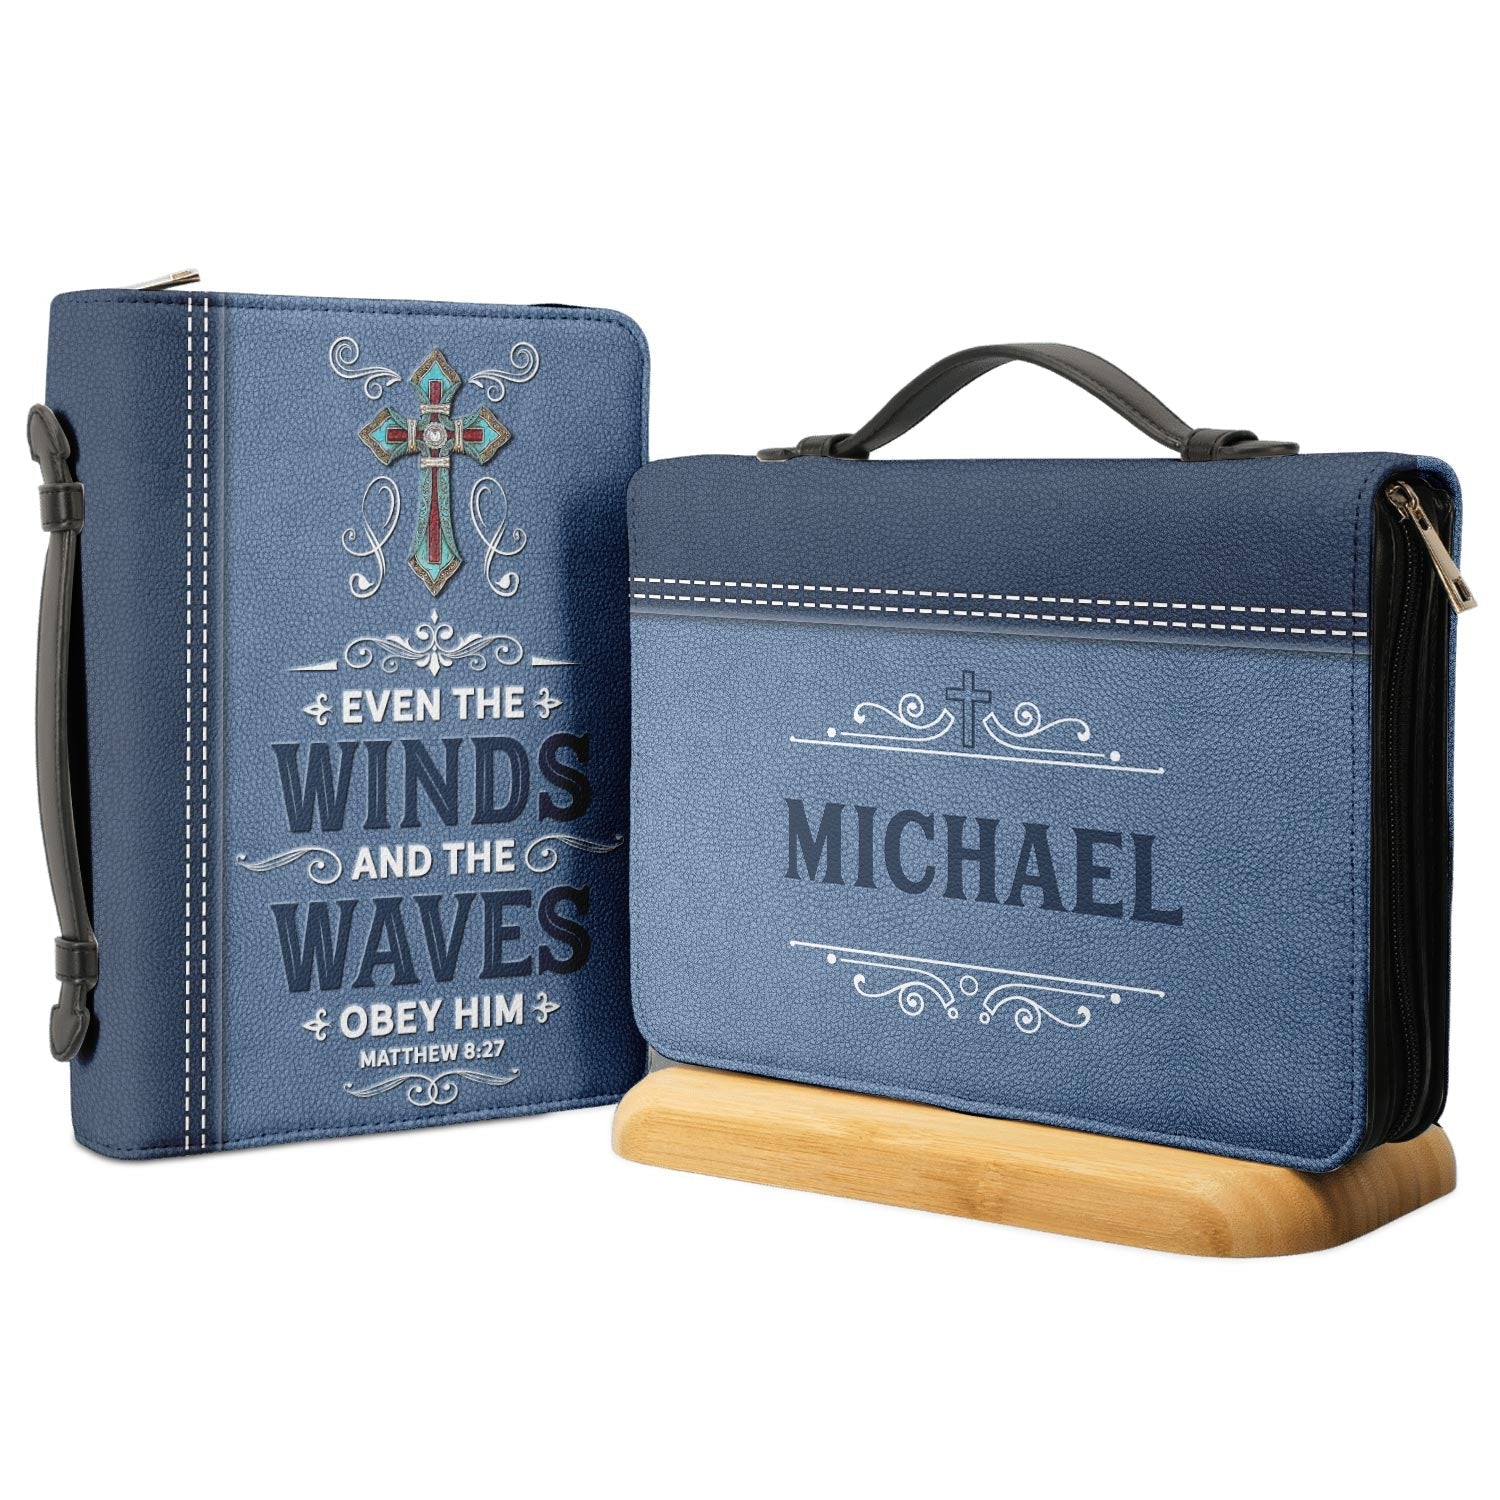 Even The Winds And The Waves Obey Him Matthew 8 27 Personalized Bible Covers - Custom Bible Case Christian Pastor